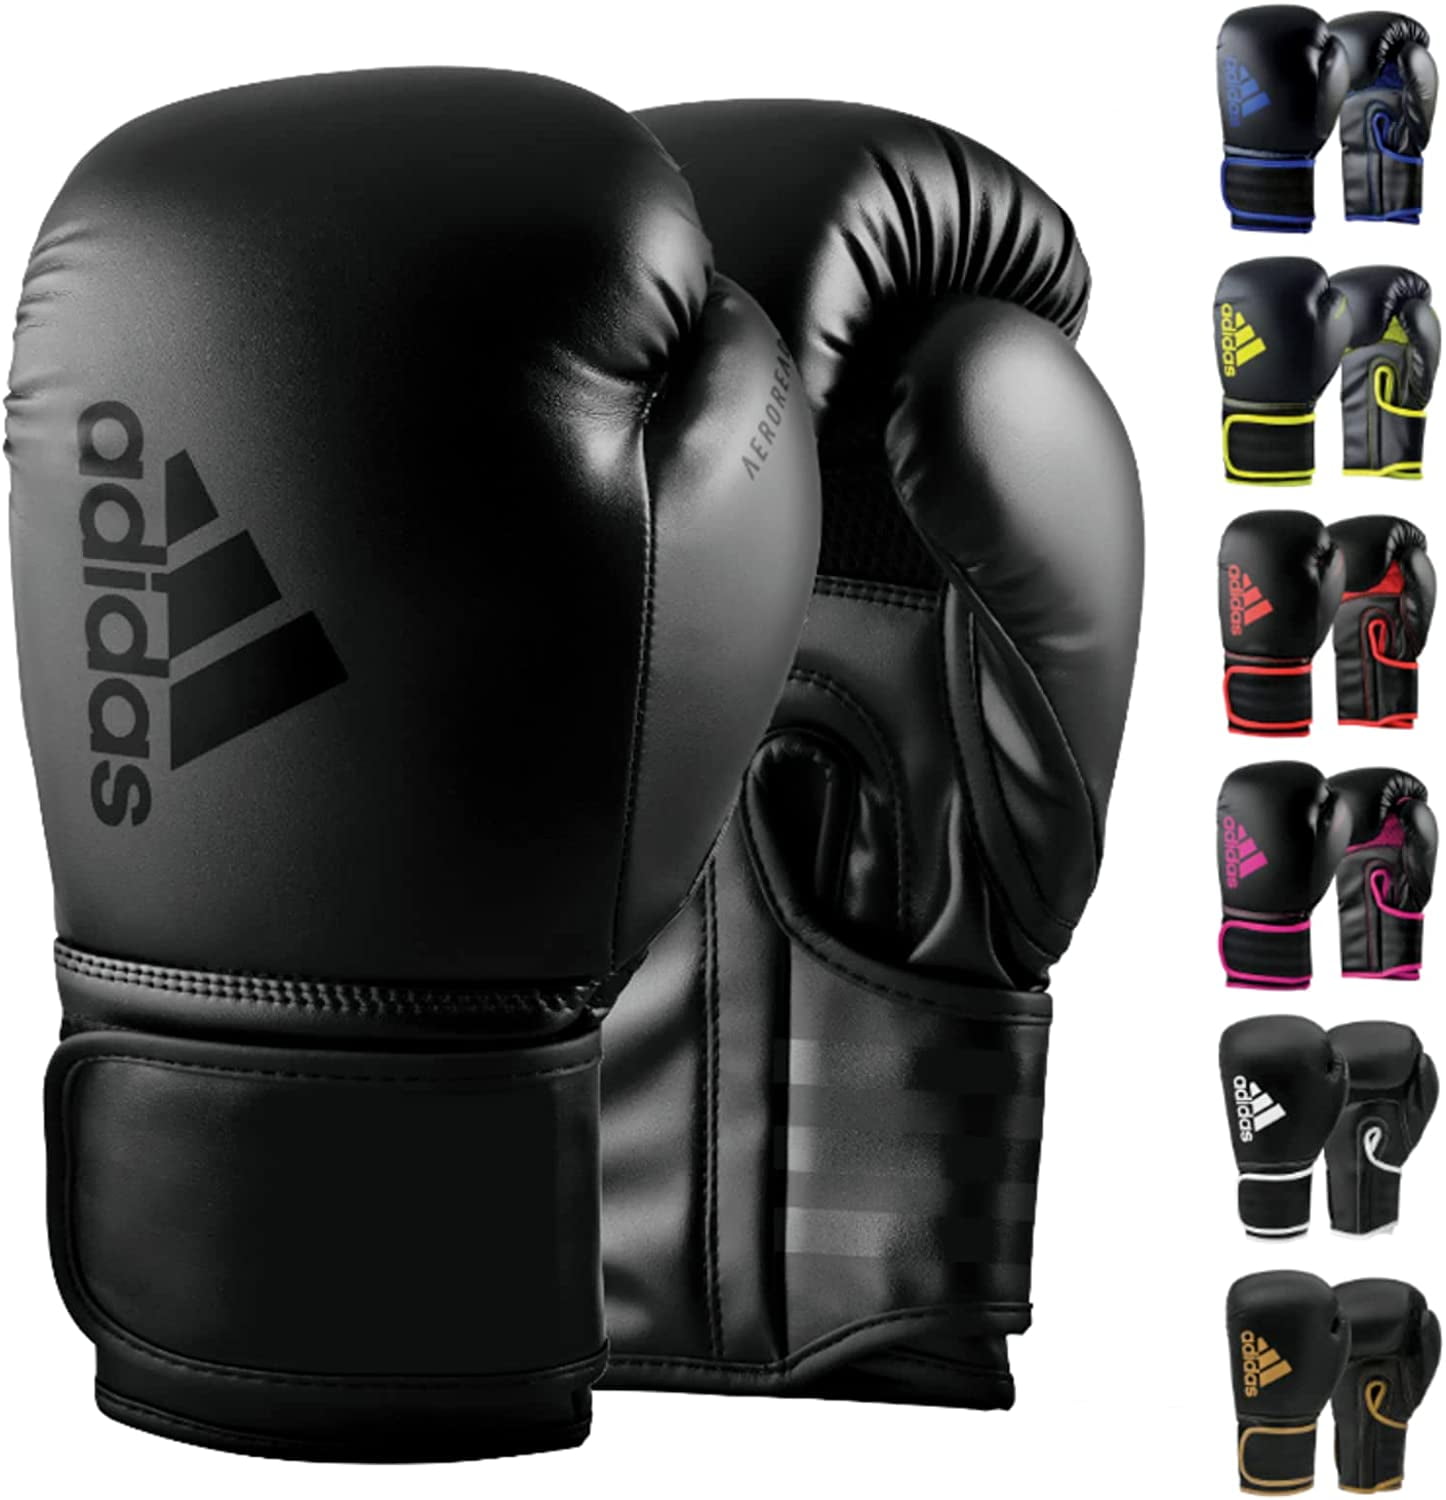 Adidas Hybrid Gloves, 6 Bag, Training, Boxing Kickboxing, 80 Boxing, for and Women and Oz., Black for Men